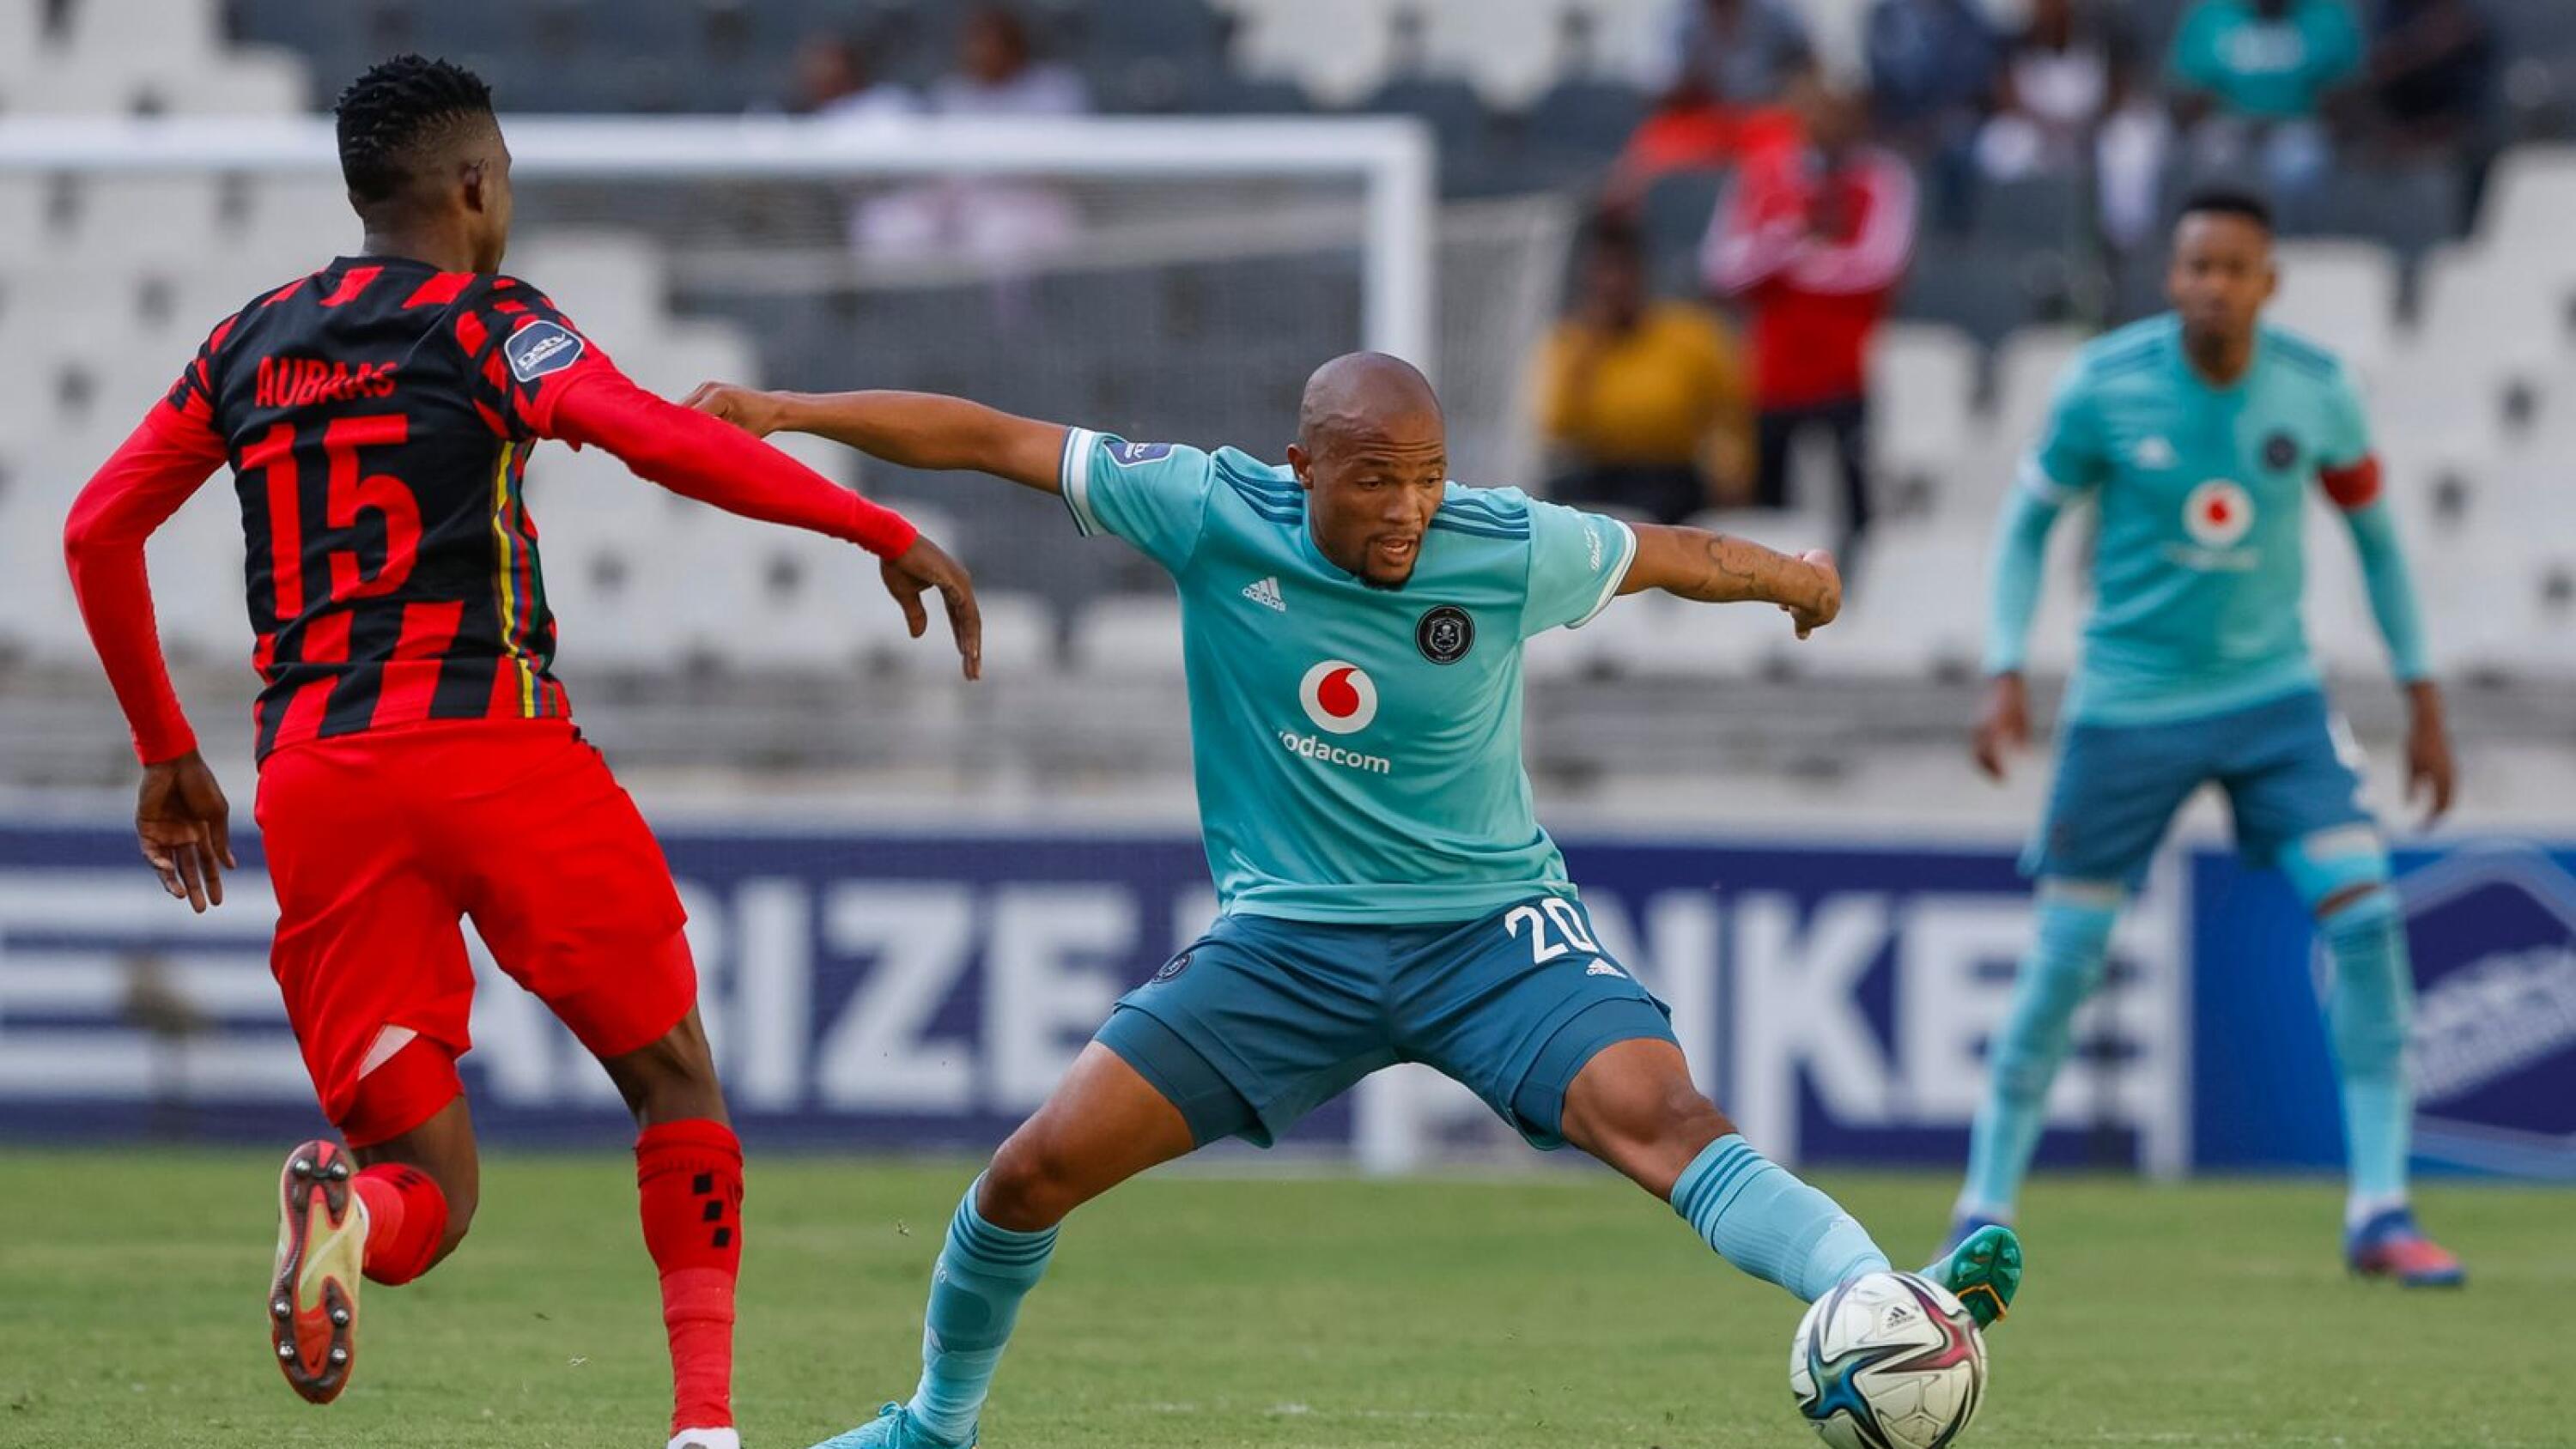 Goodman Mosele of Pirates in action during their DStv Premiership game against TS Galaxy at Mbombela Stadium in Mbombela on Monday